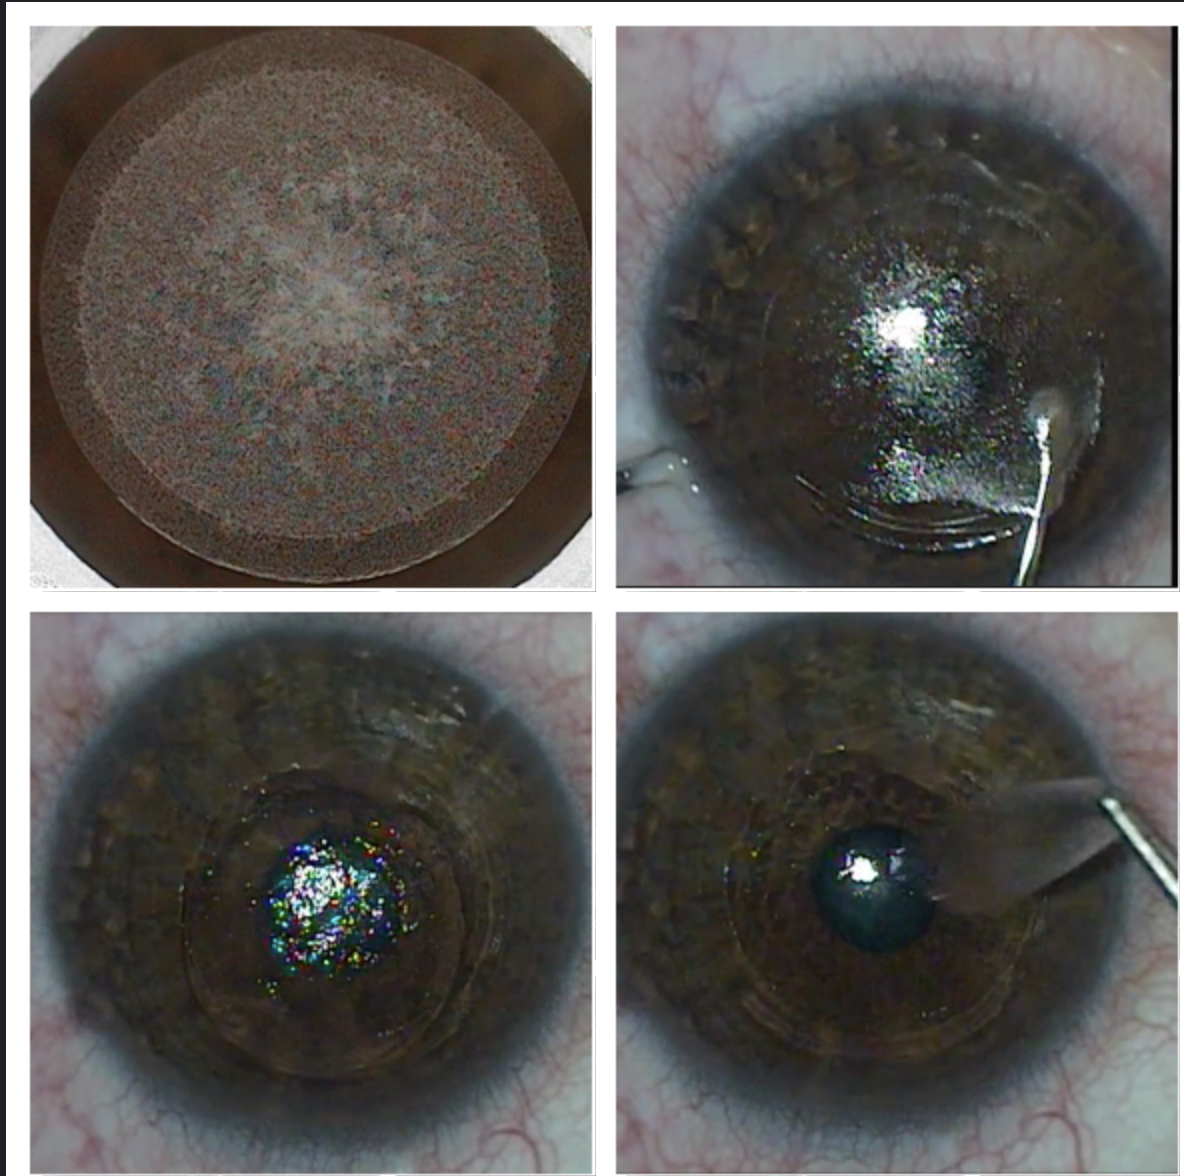 The SMILE procedure creates (top left), dissects (top right) and removes a lenticule (bottom left and right) to correct myopia and myopic astigmatism.